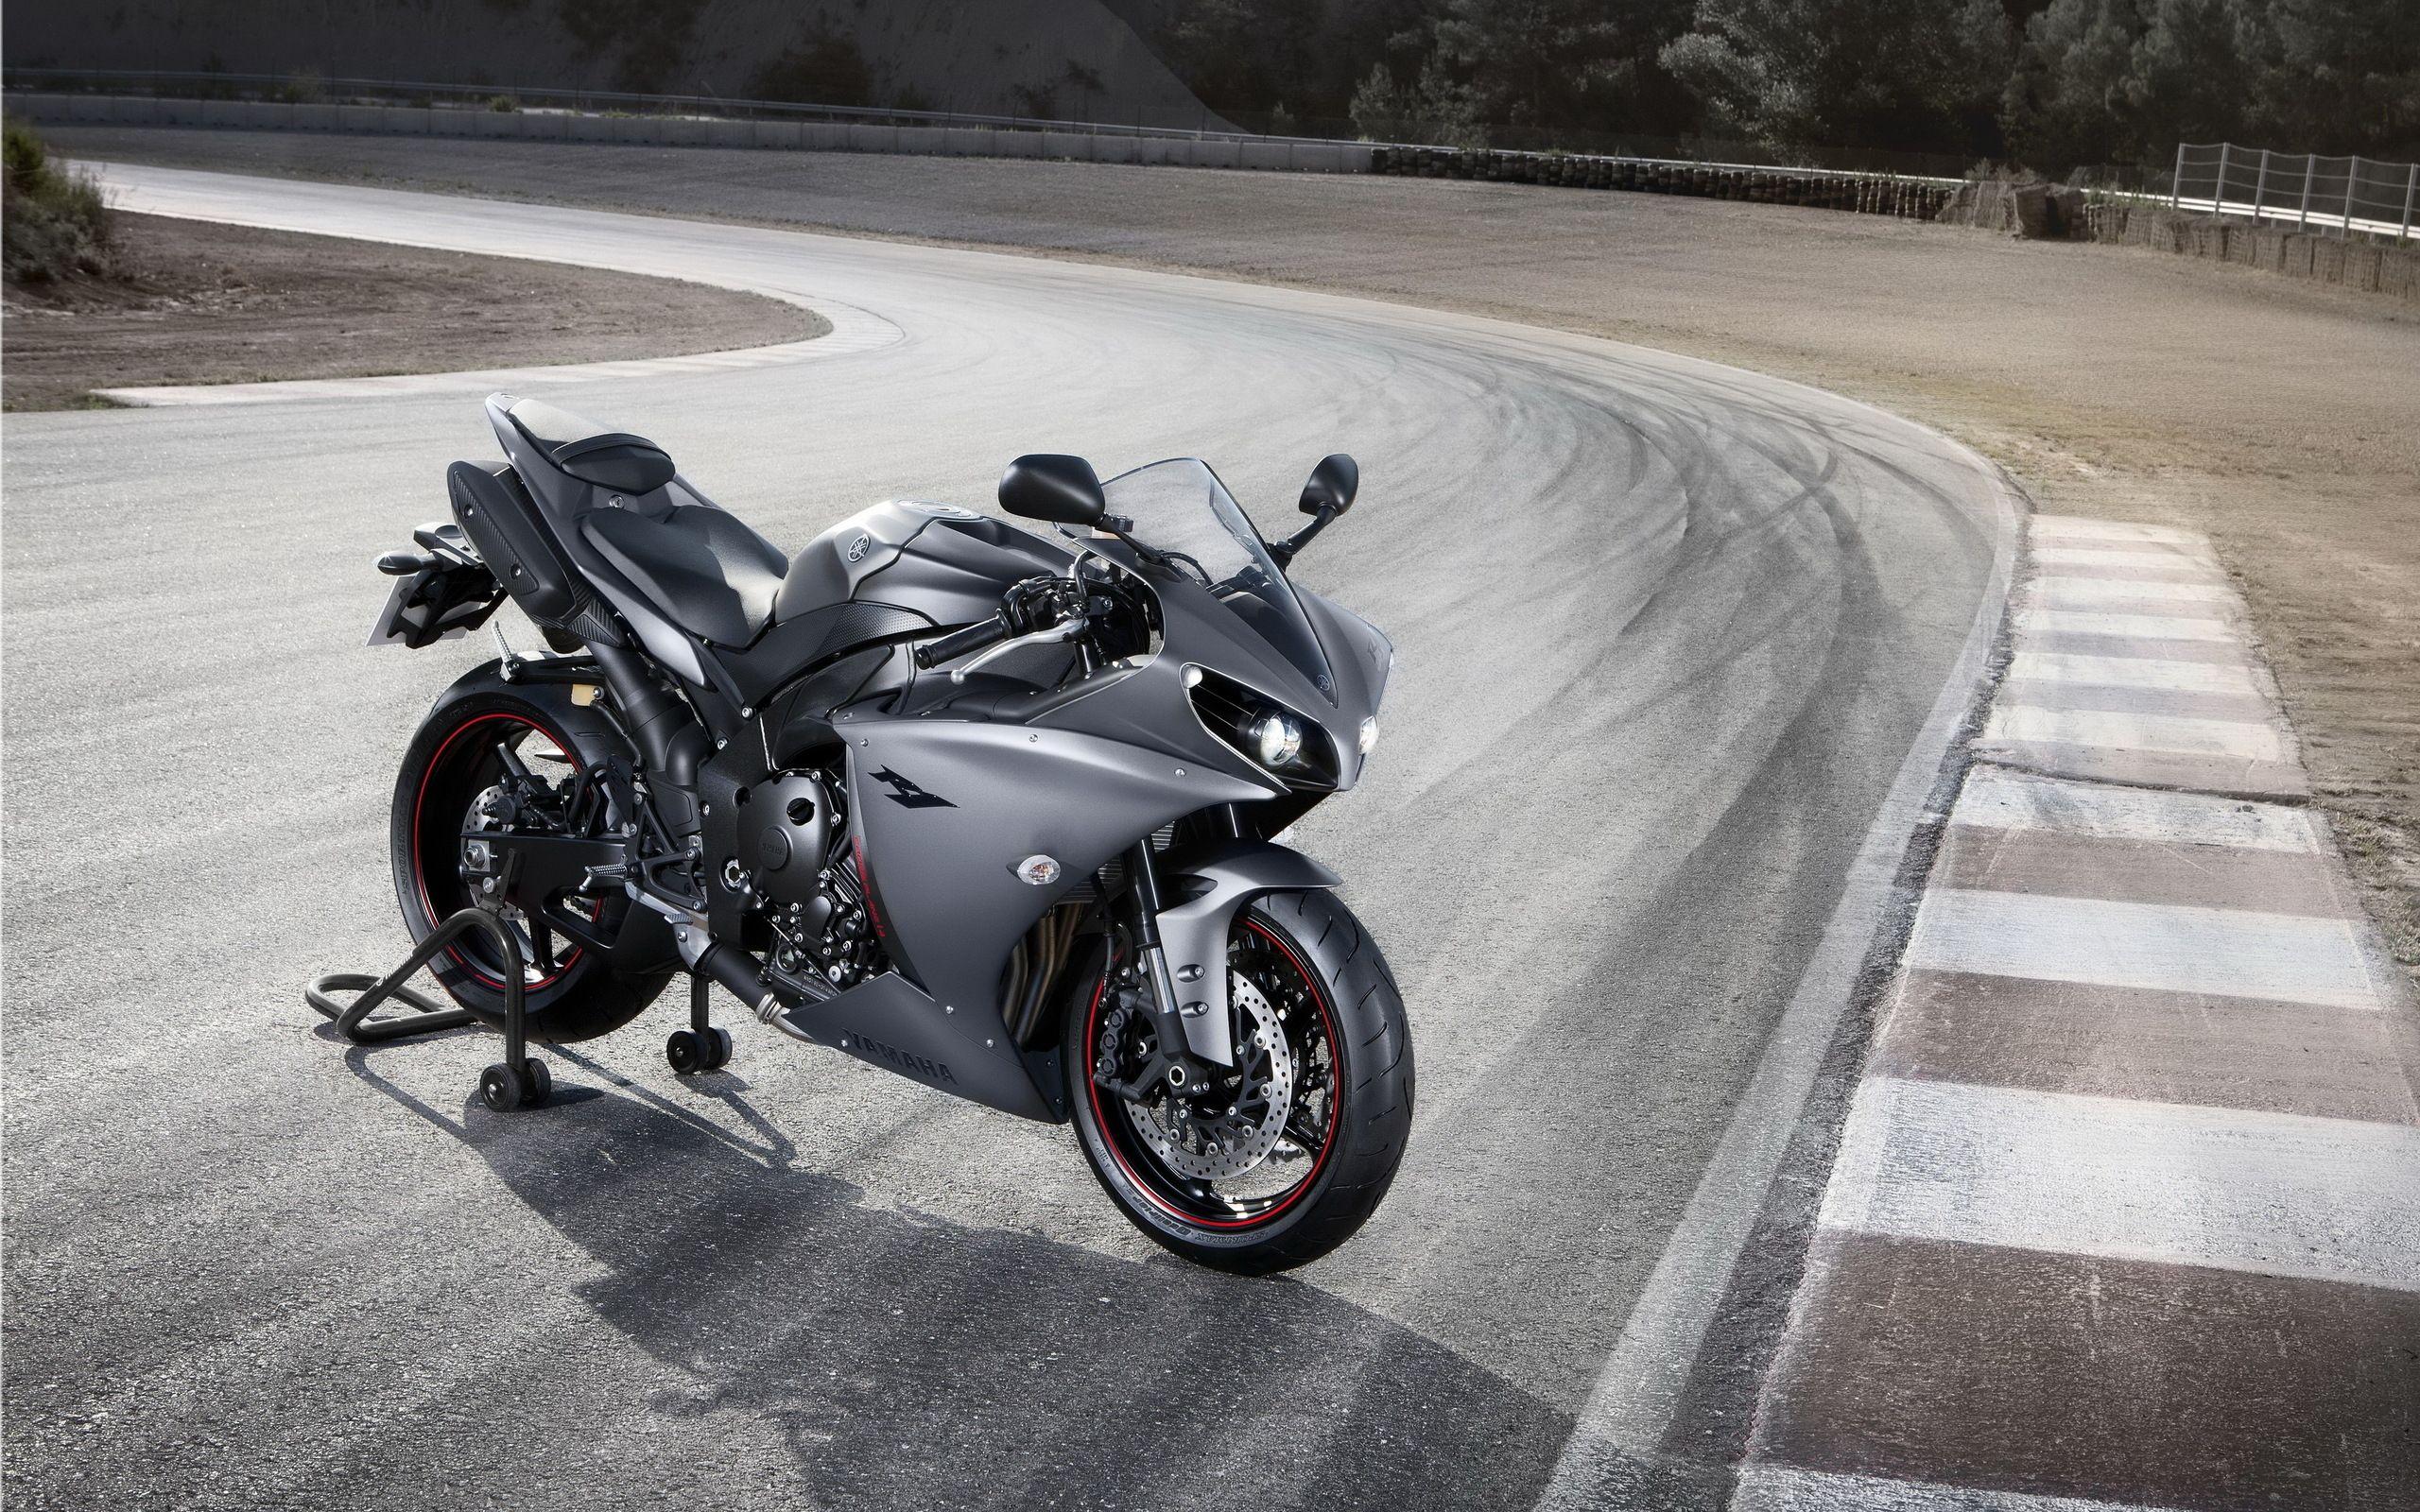 Yamaha YZF R1 Wallpaper And Image, Picture, Photo